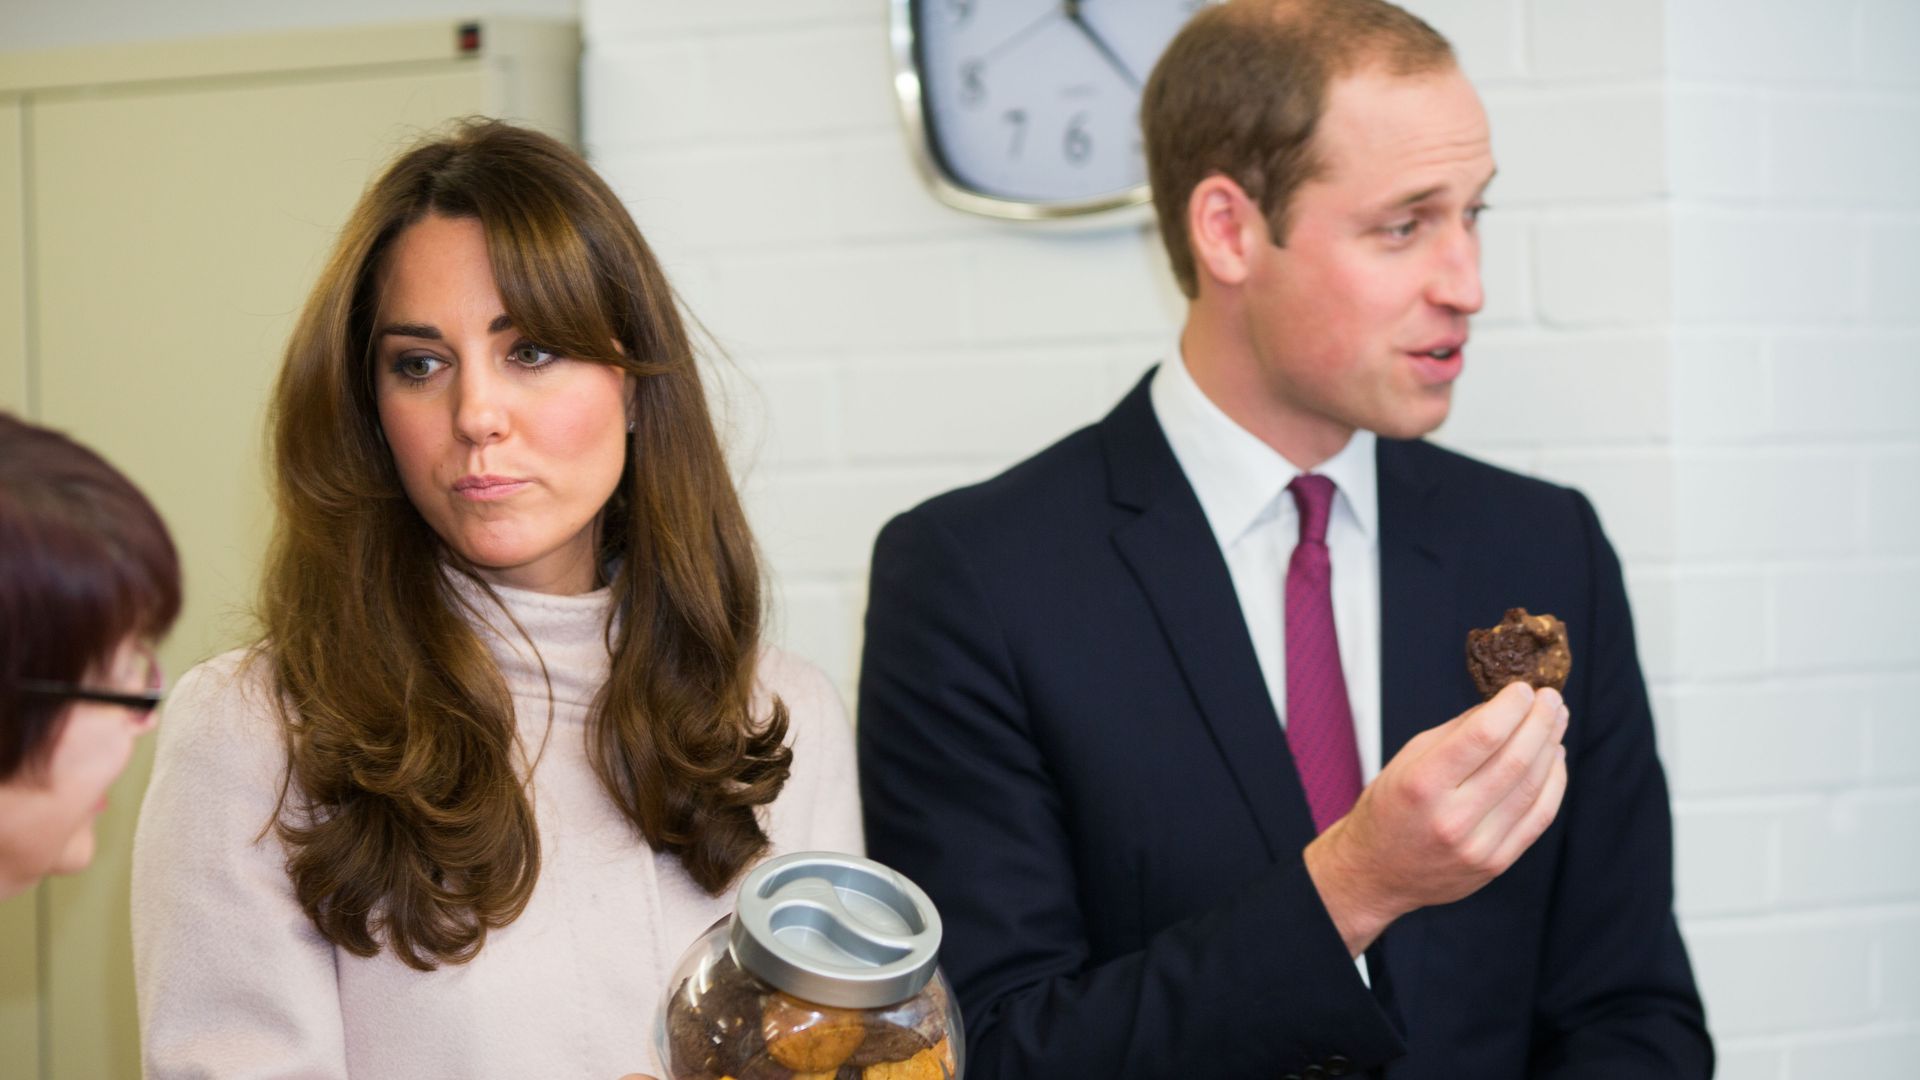 kate and william eating cookies 